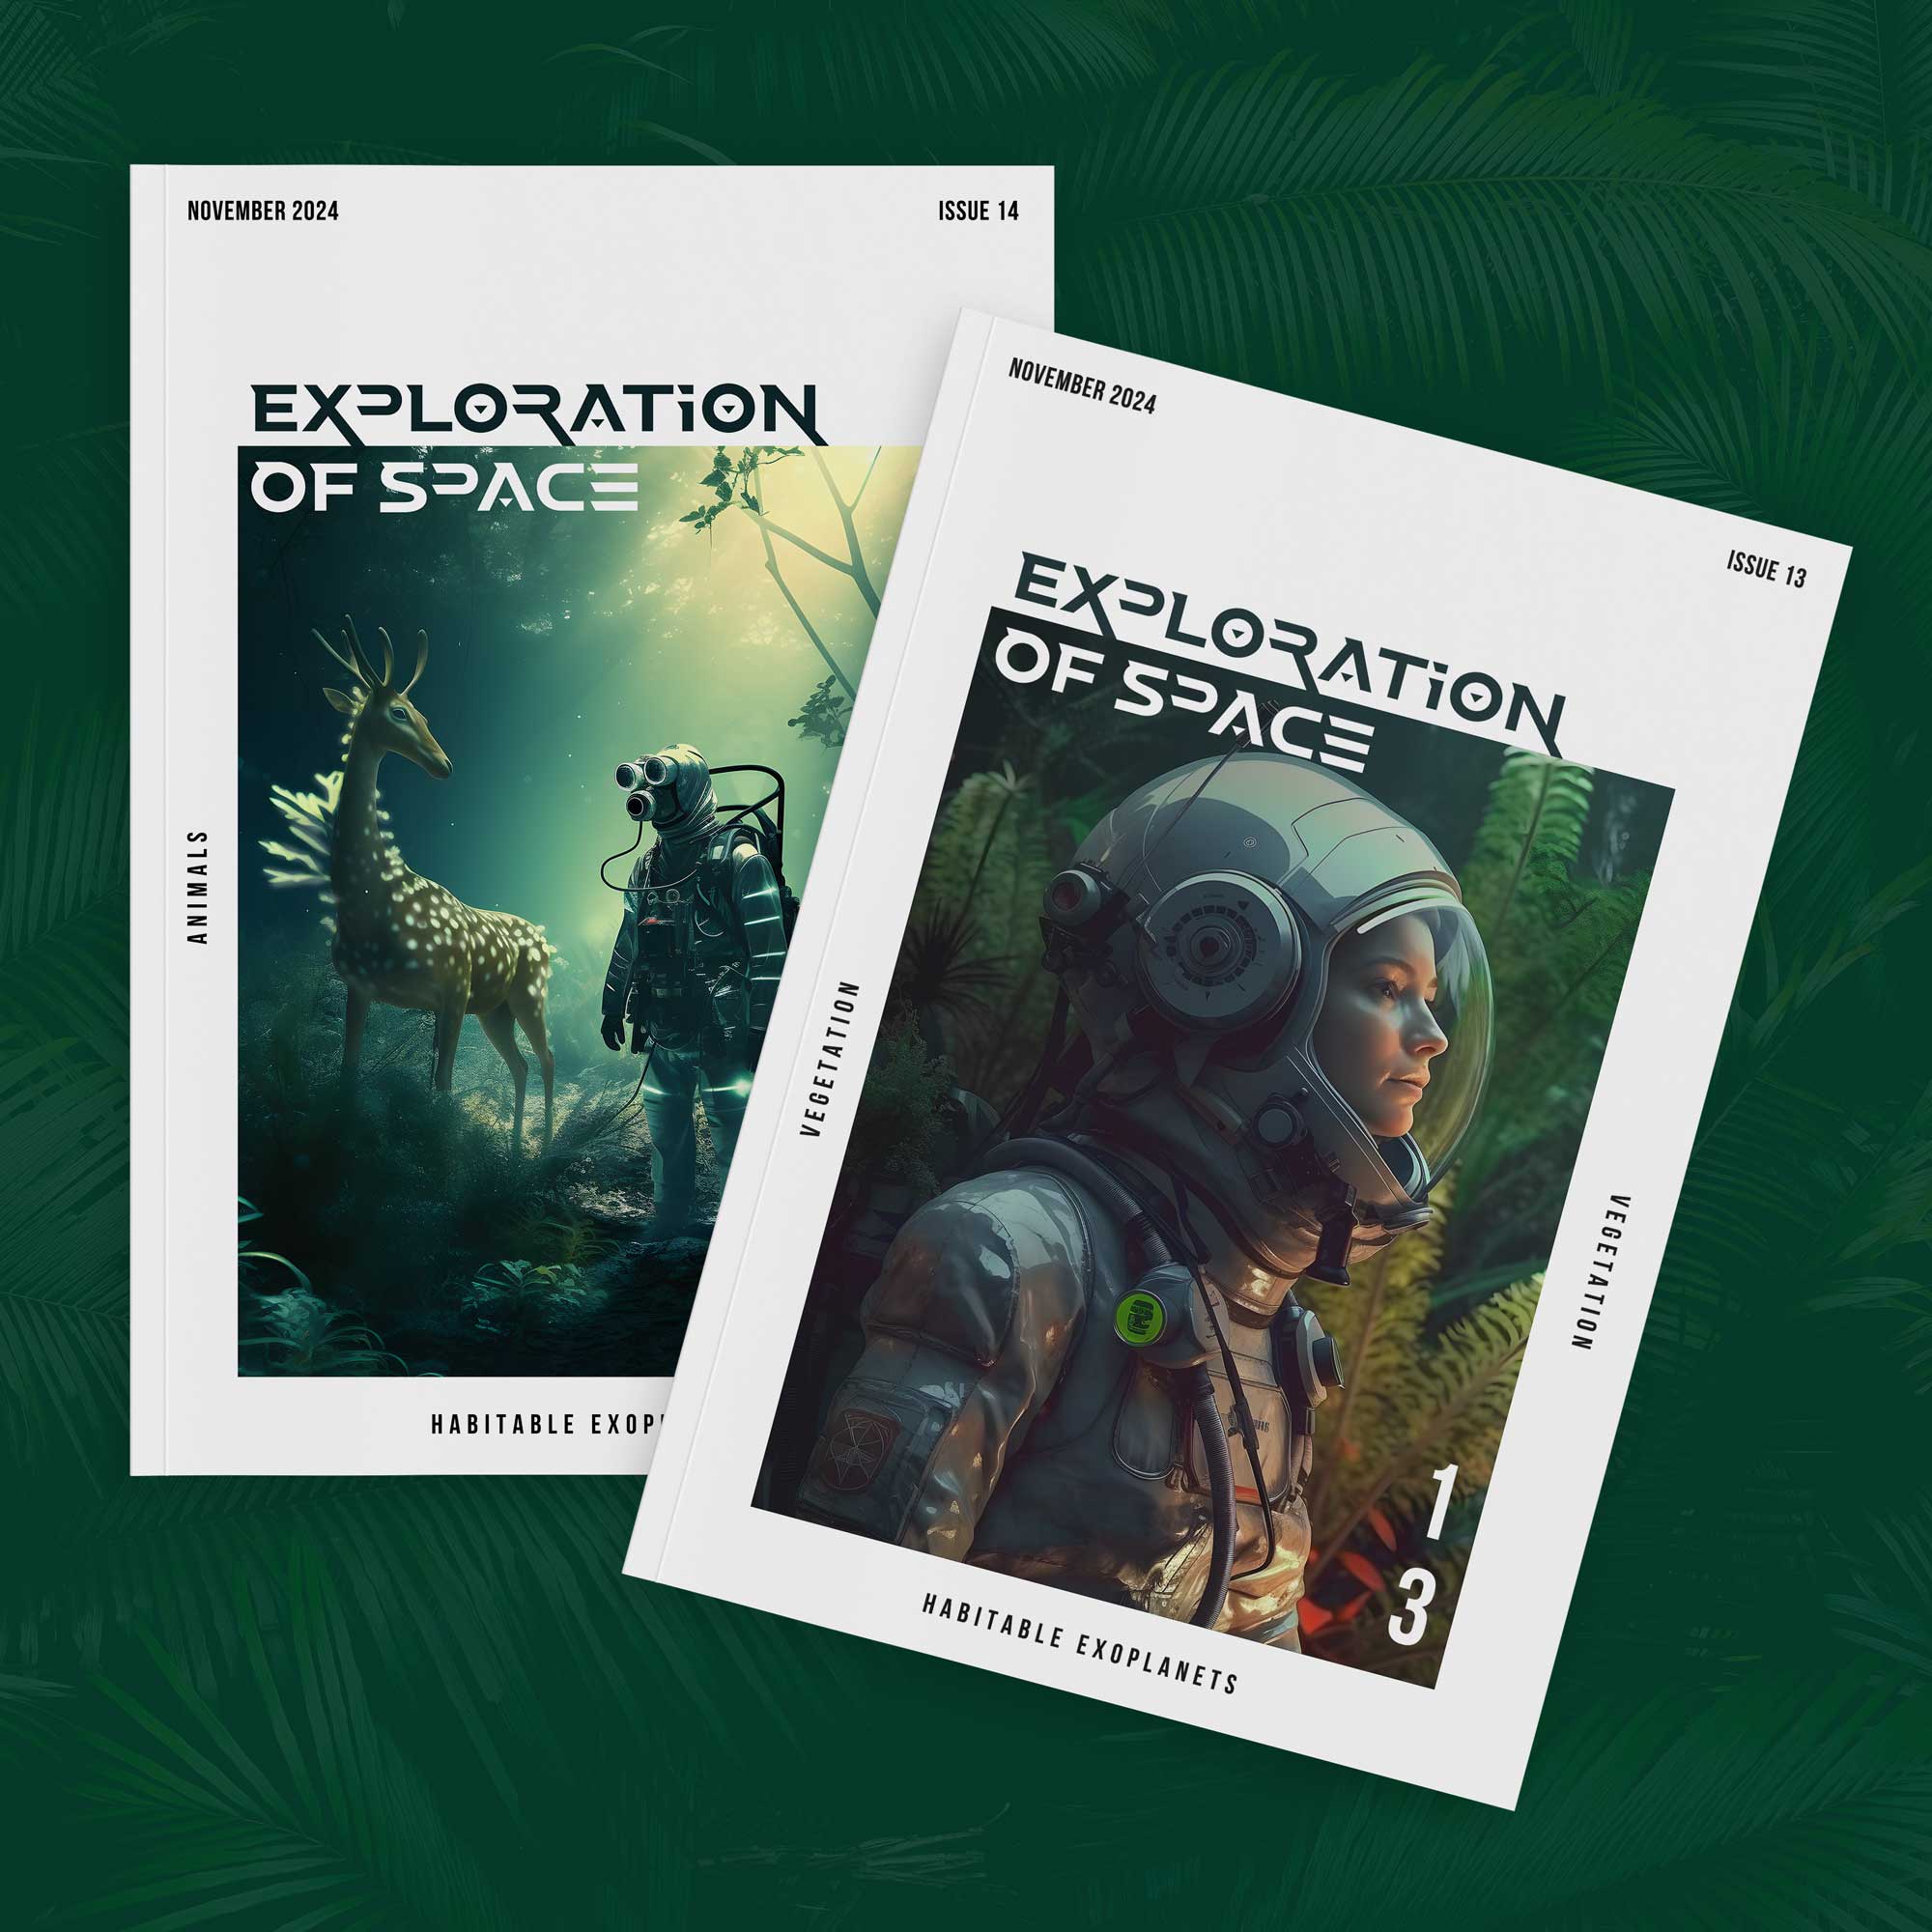 Exploration of Space Magazine Cover by freelance art director UI UX Designer Christoph Gey from Leipzig Germany